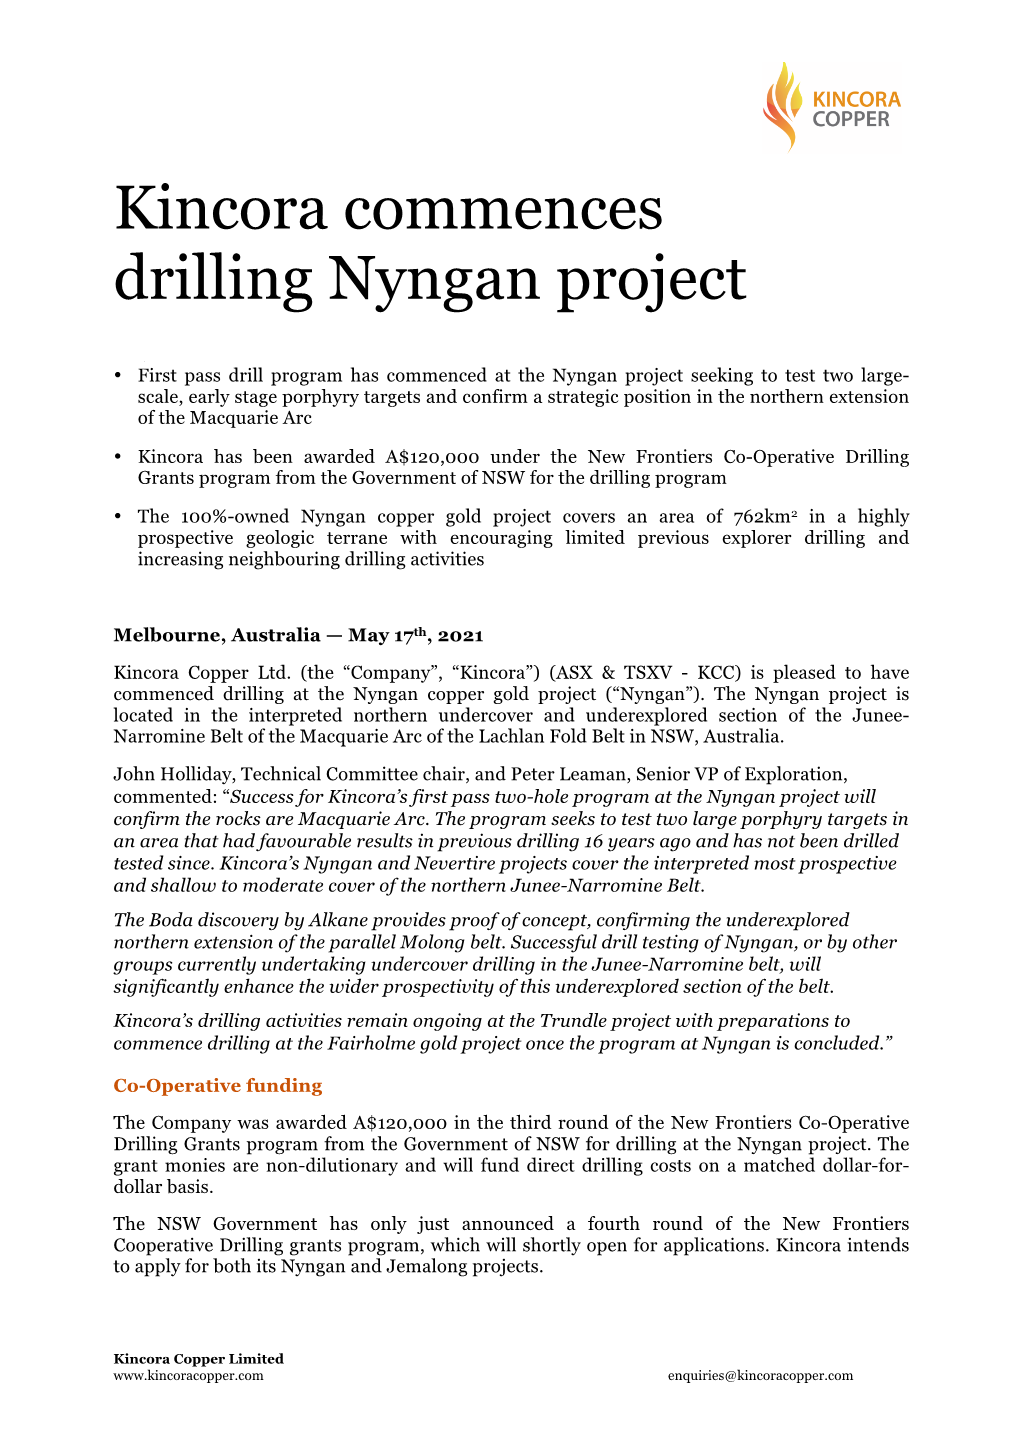 Kincora Copper Commences Drilling Nyngan Project